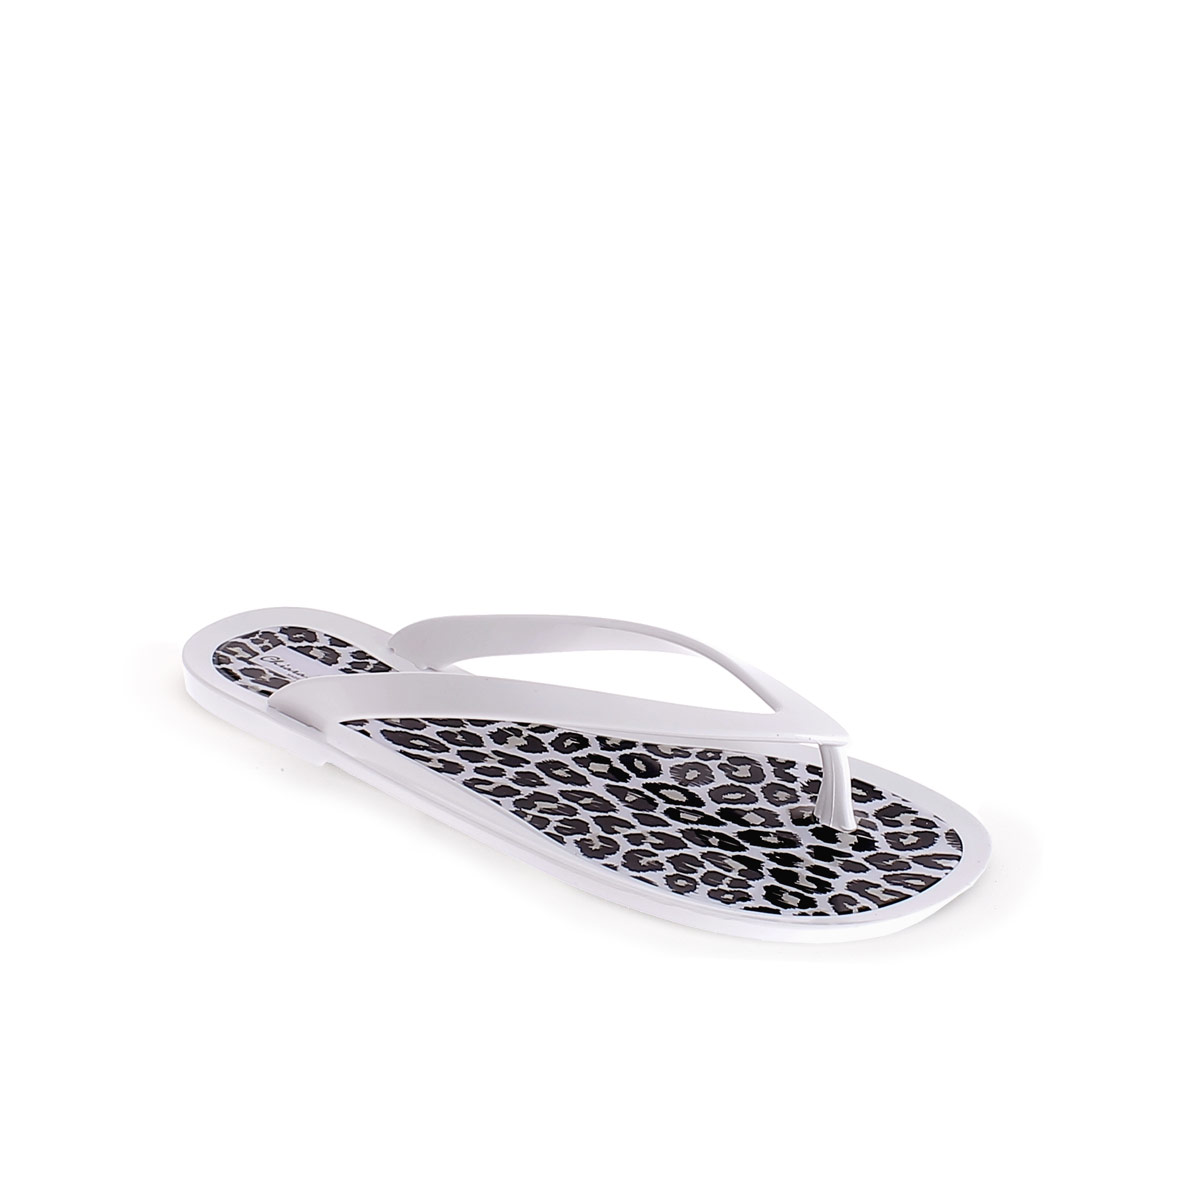 WHITE PVC THONG SLIPPER WITH LEOPARD PRINTING INSOLE